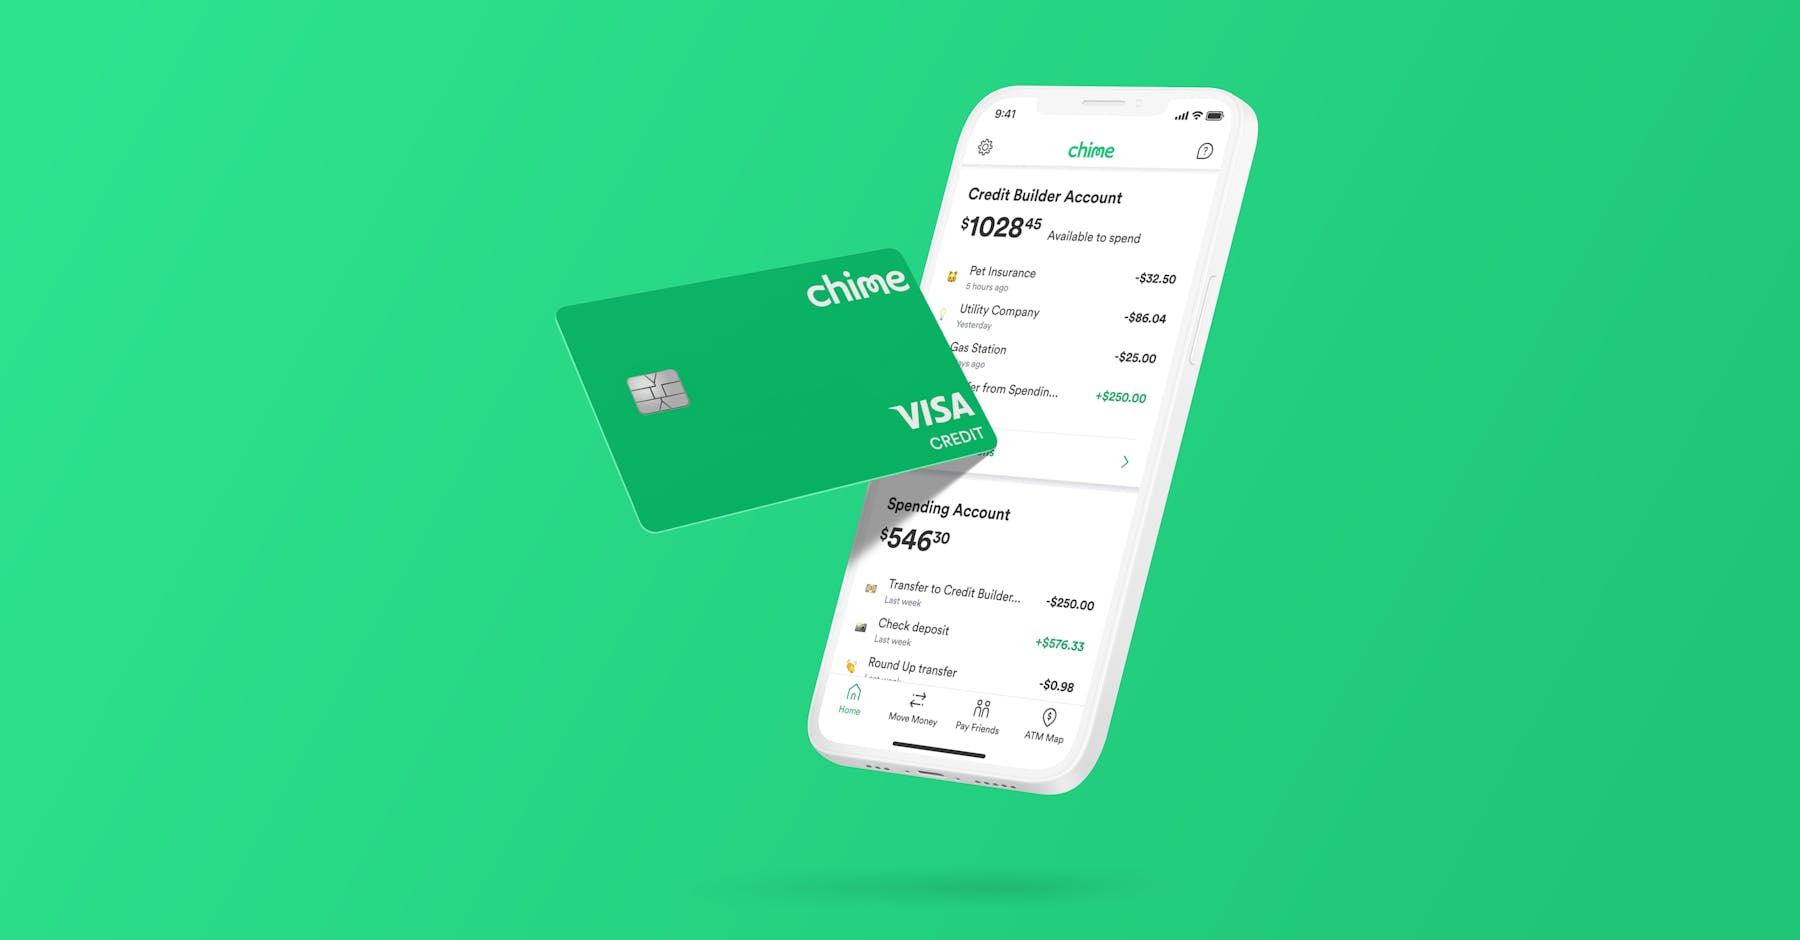 Can I Withdraw Money From Chime Without My Card?